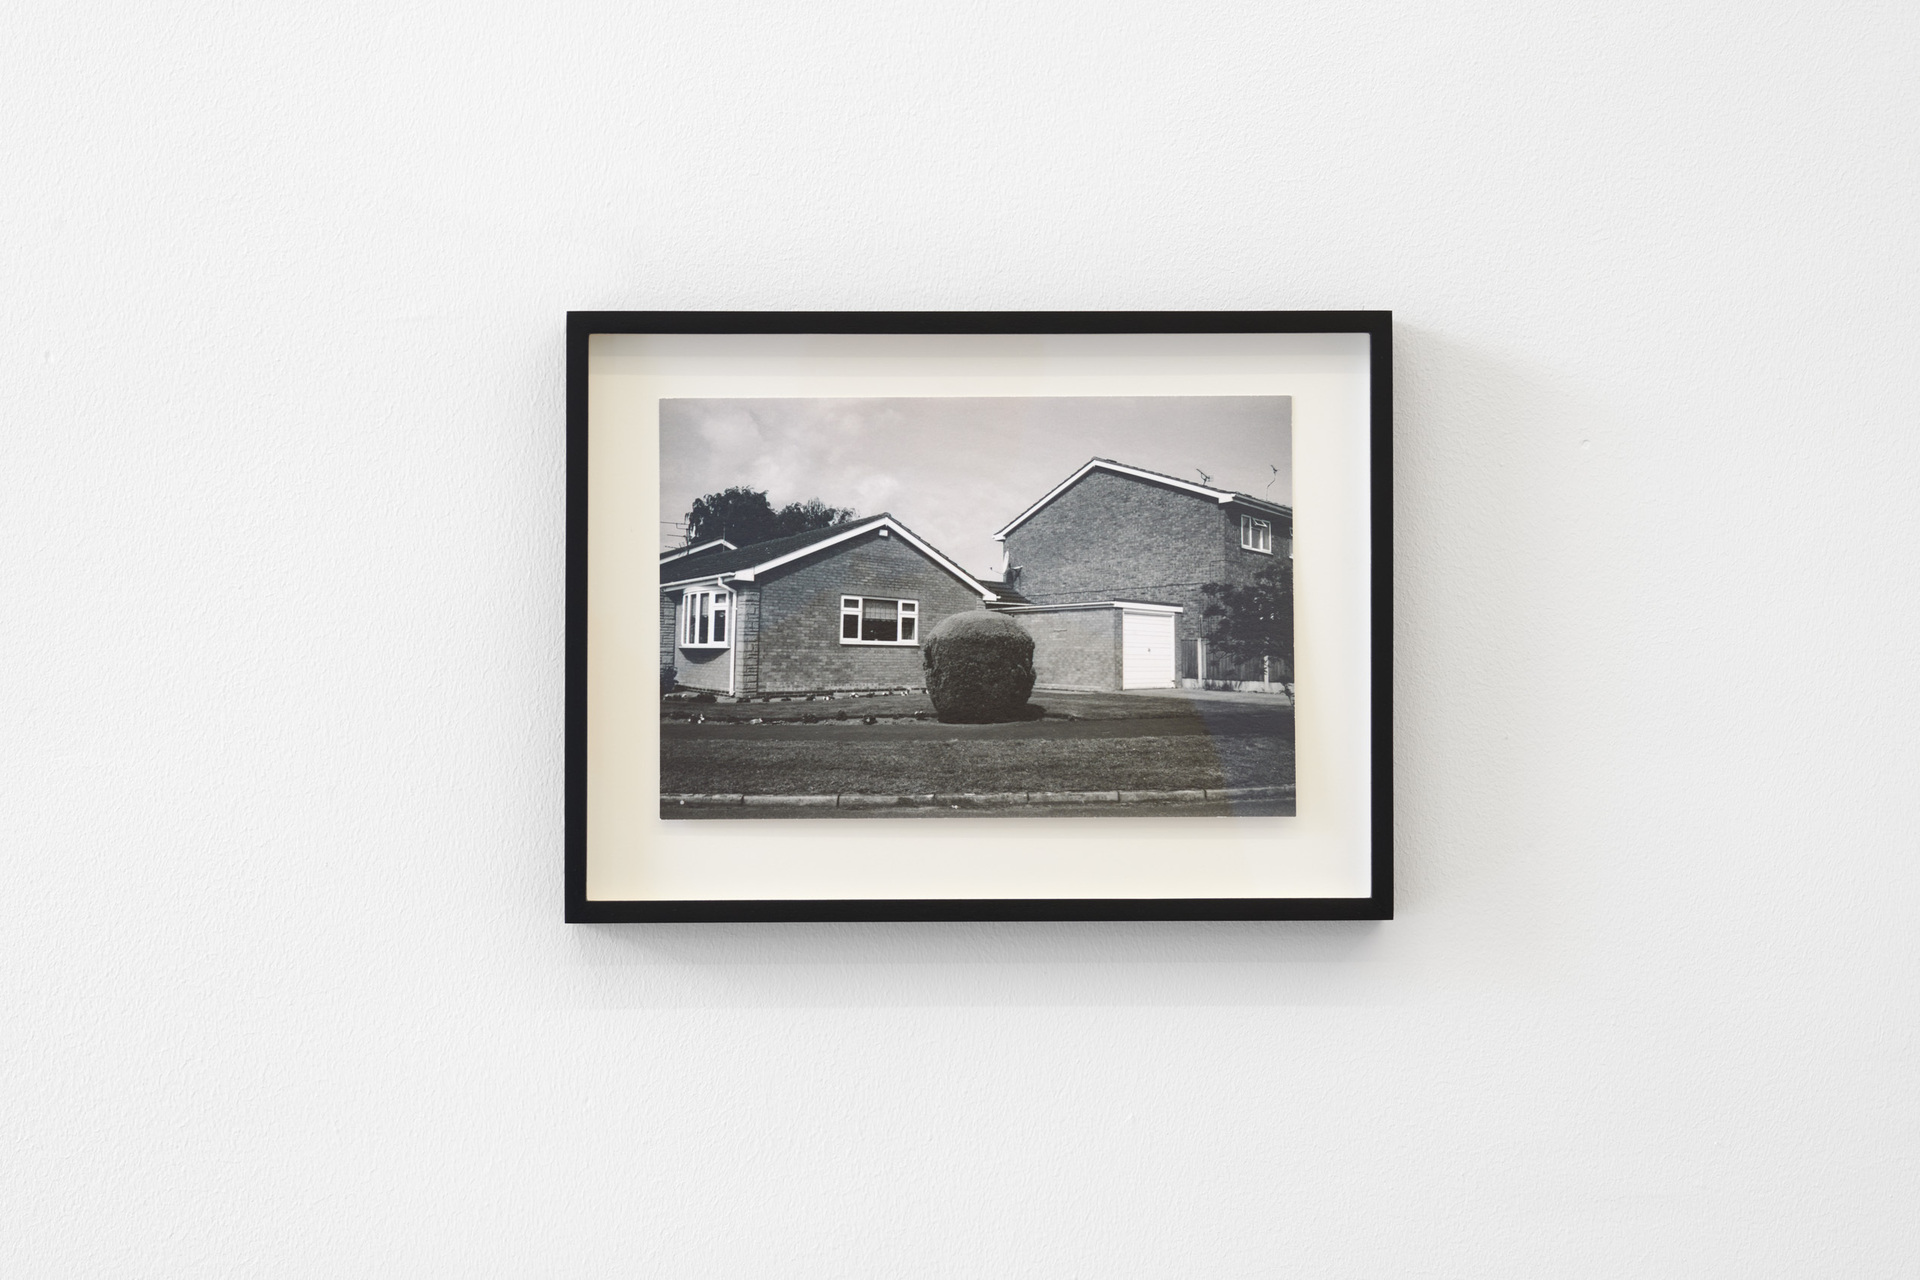 Miriam Stoney, Sensual objects, real qualities, 2021, Four black and white photographs by Tom Glencross, framed, Courtesy the artists. Photo: Maximilian Anelli-Monti